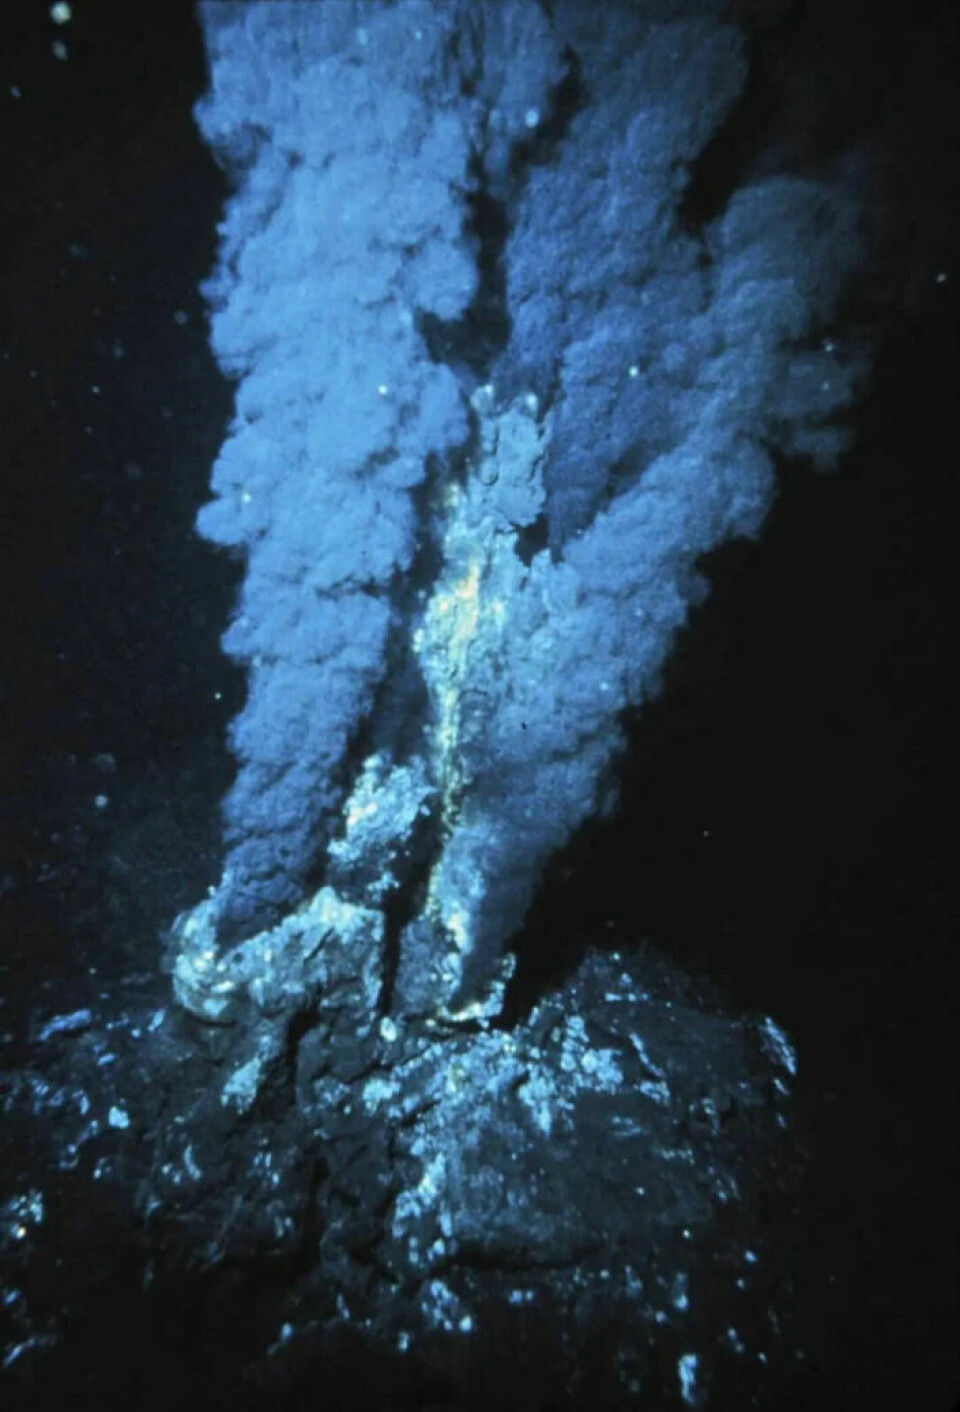 Deep sea minerals are found in the areas around undersea volcanoes, called black smokers.